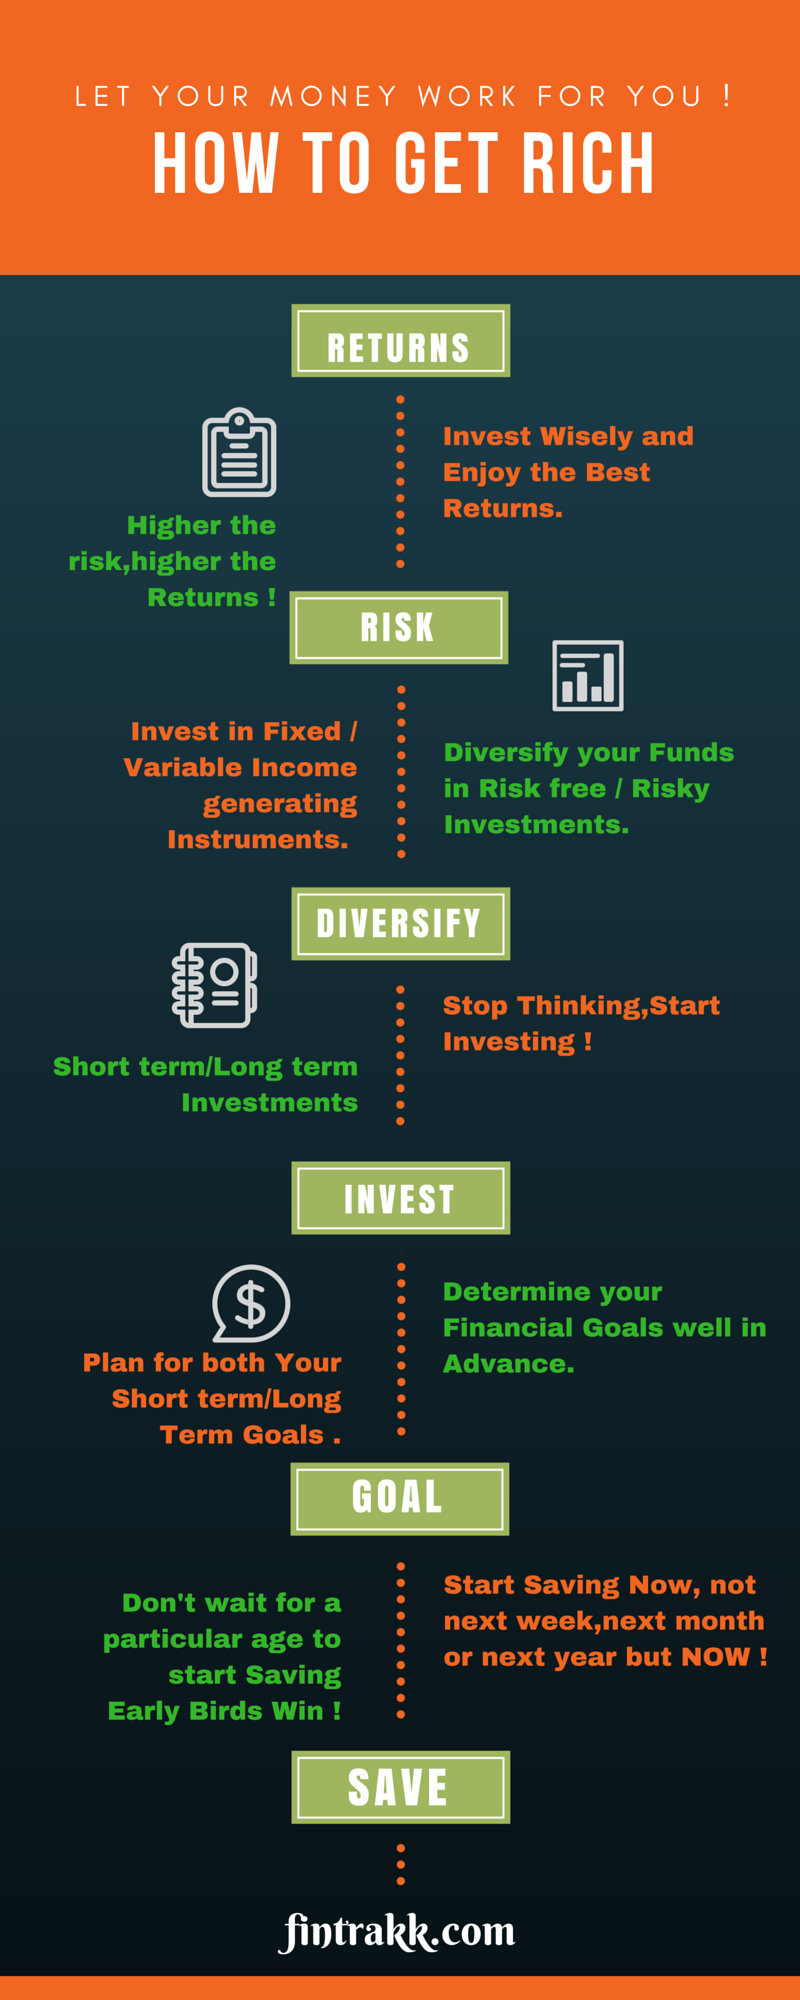 How to get rich infographic, tips for getting rich,finance tips,financial planning